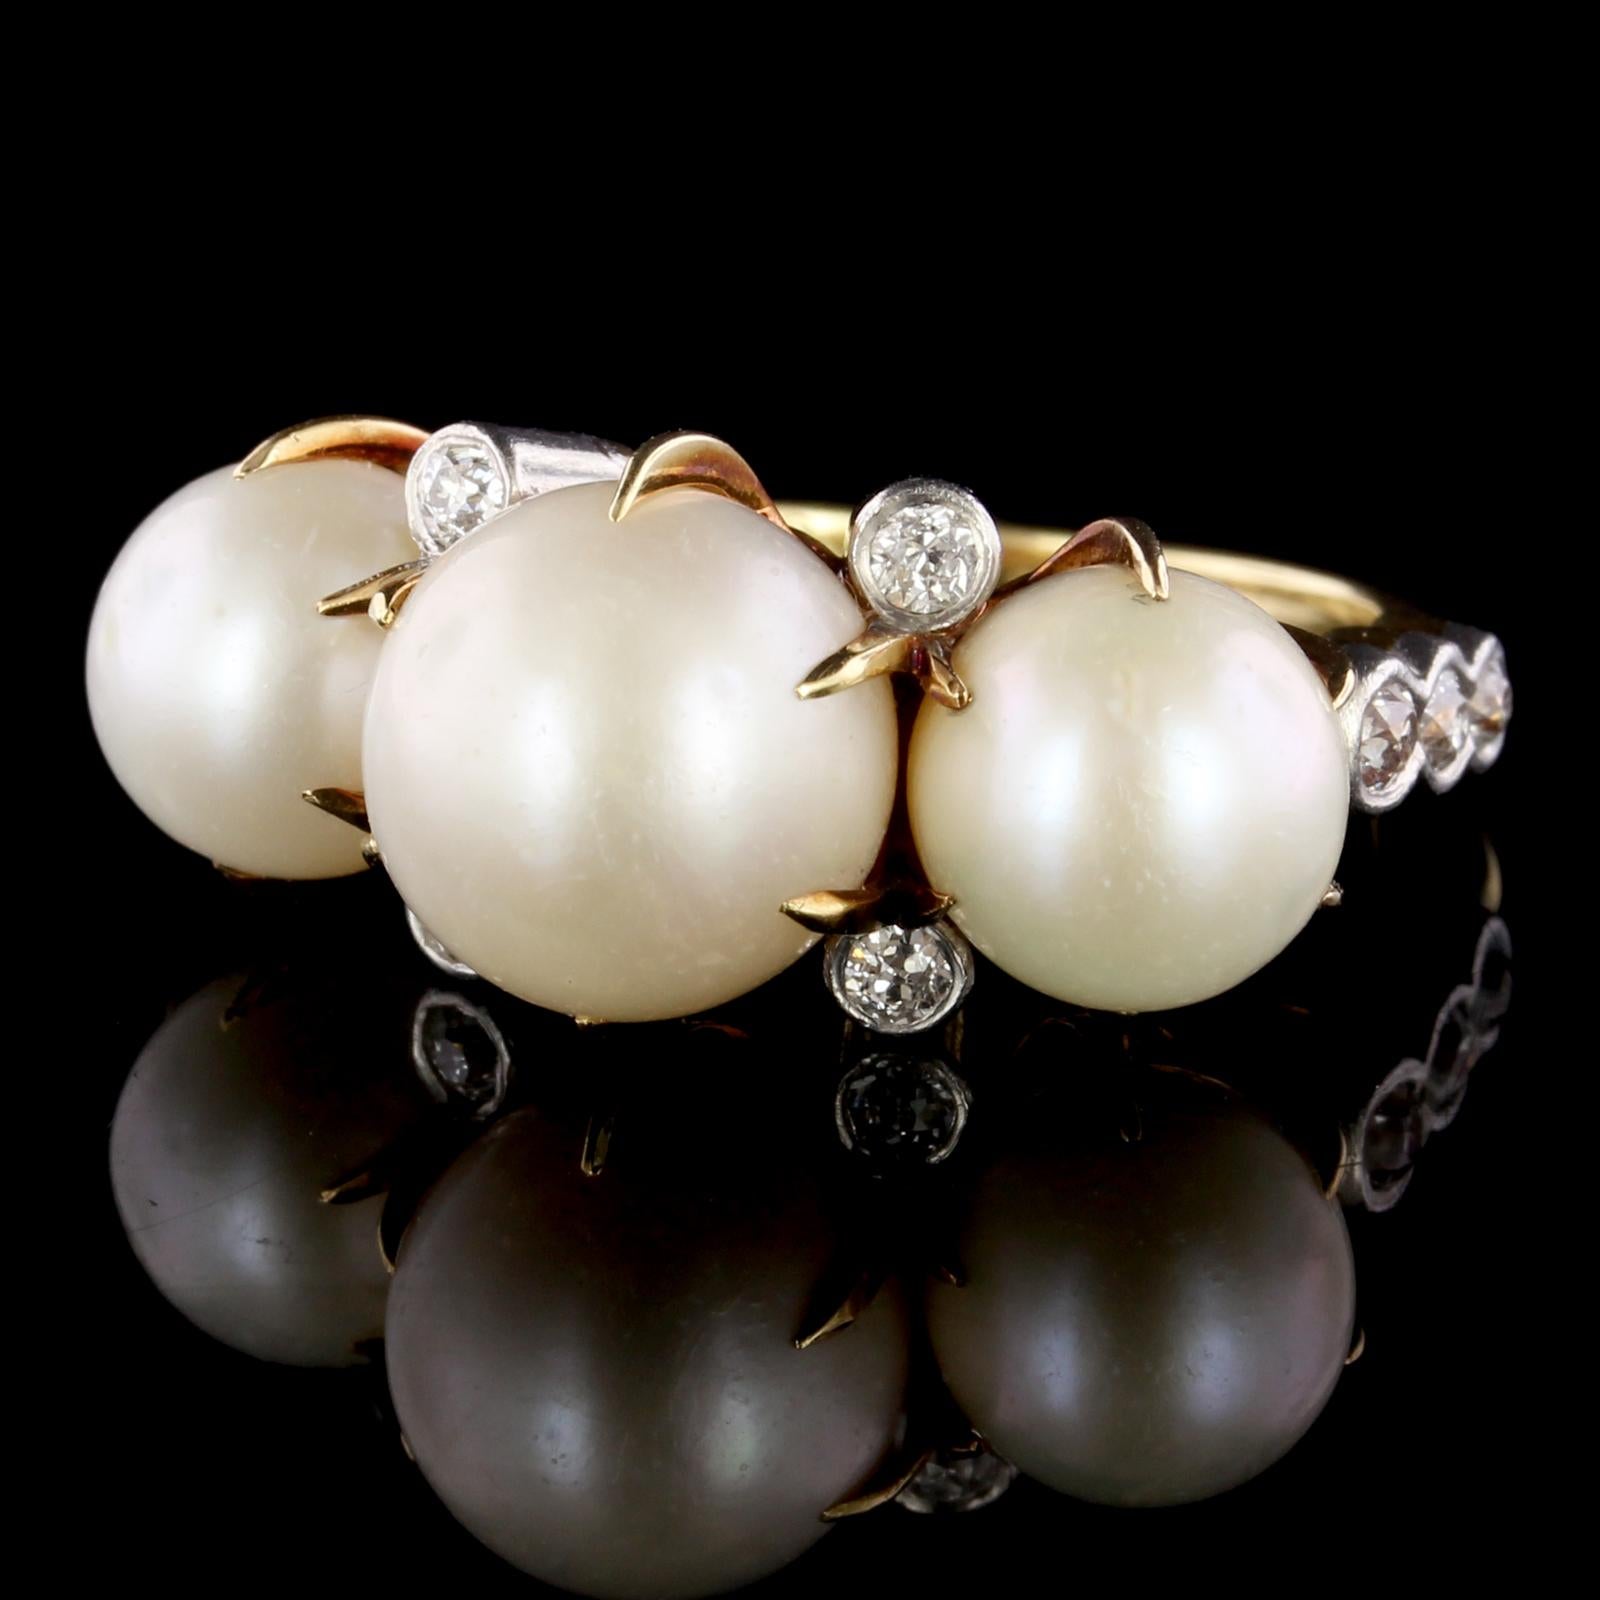 Bailey, Banks & Biddle Edwardian Natural Freshwater Pearl and Diamond Ring GIA . The ring is set
with 3 natural freshwater pearls ranging from 8.13 to 10.06mm., GIA #6204405341,
stating that the pearls are natural freshwater, further set with 10 old